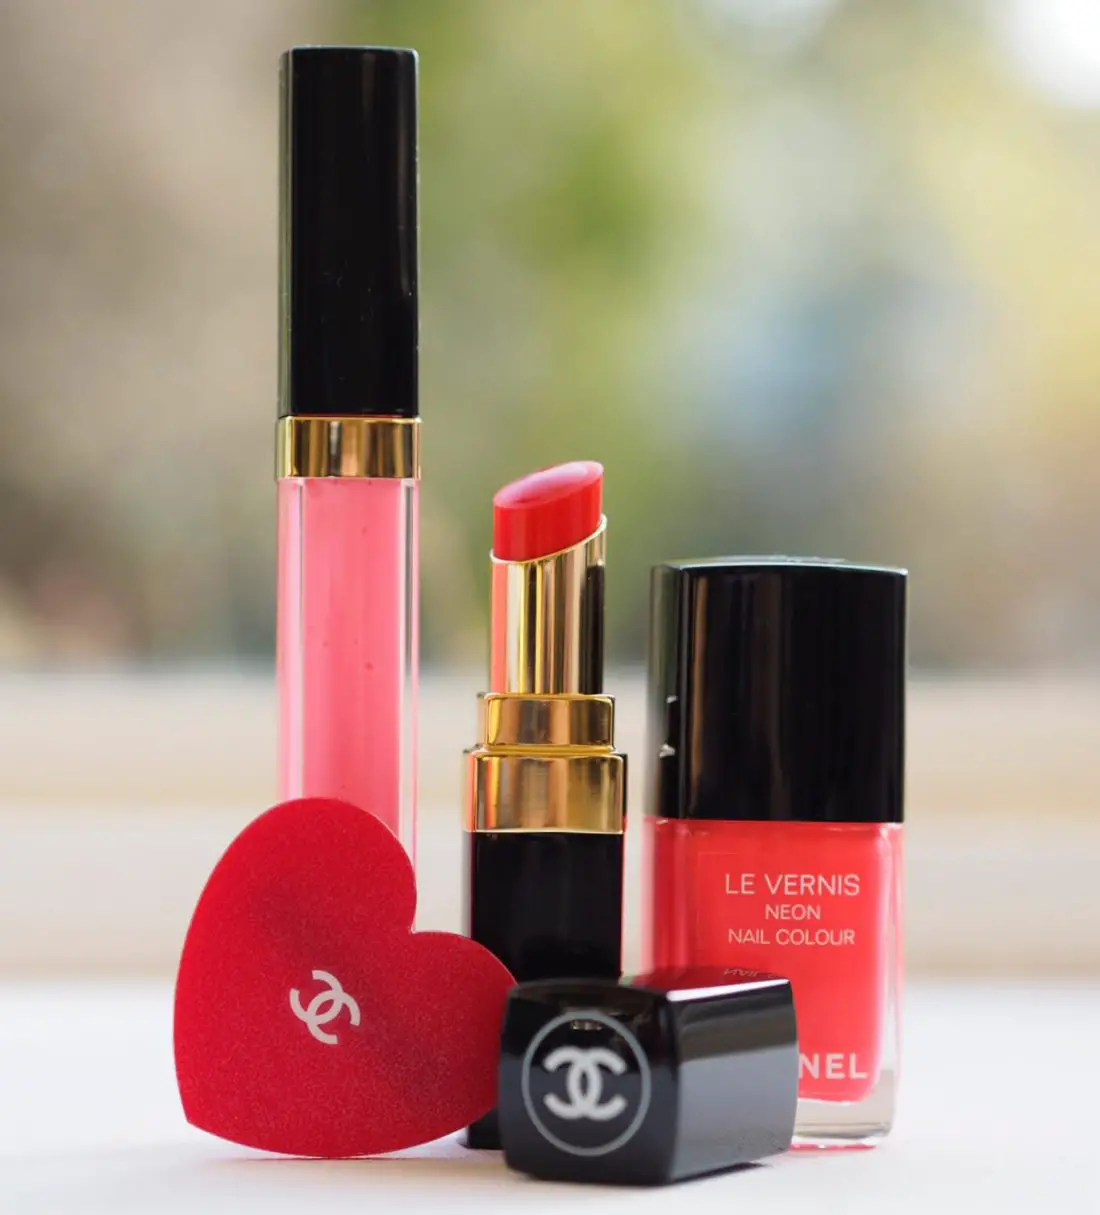 Chanel Rouge Coco Lip Blush Collection